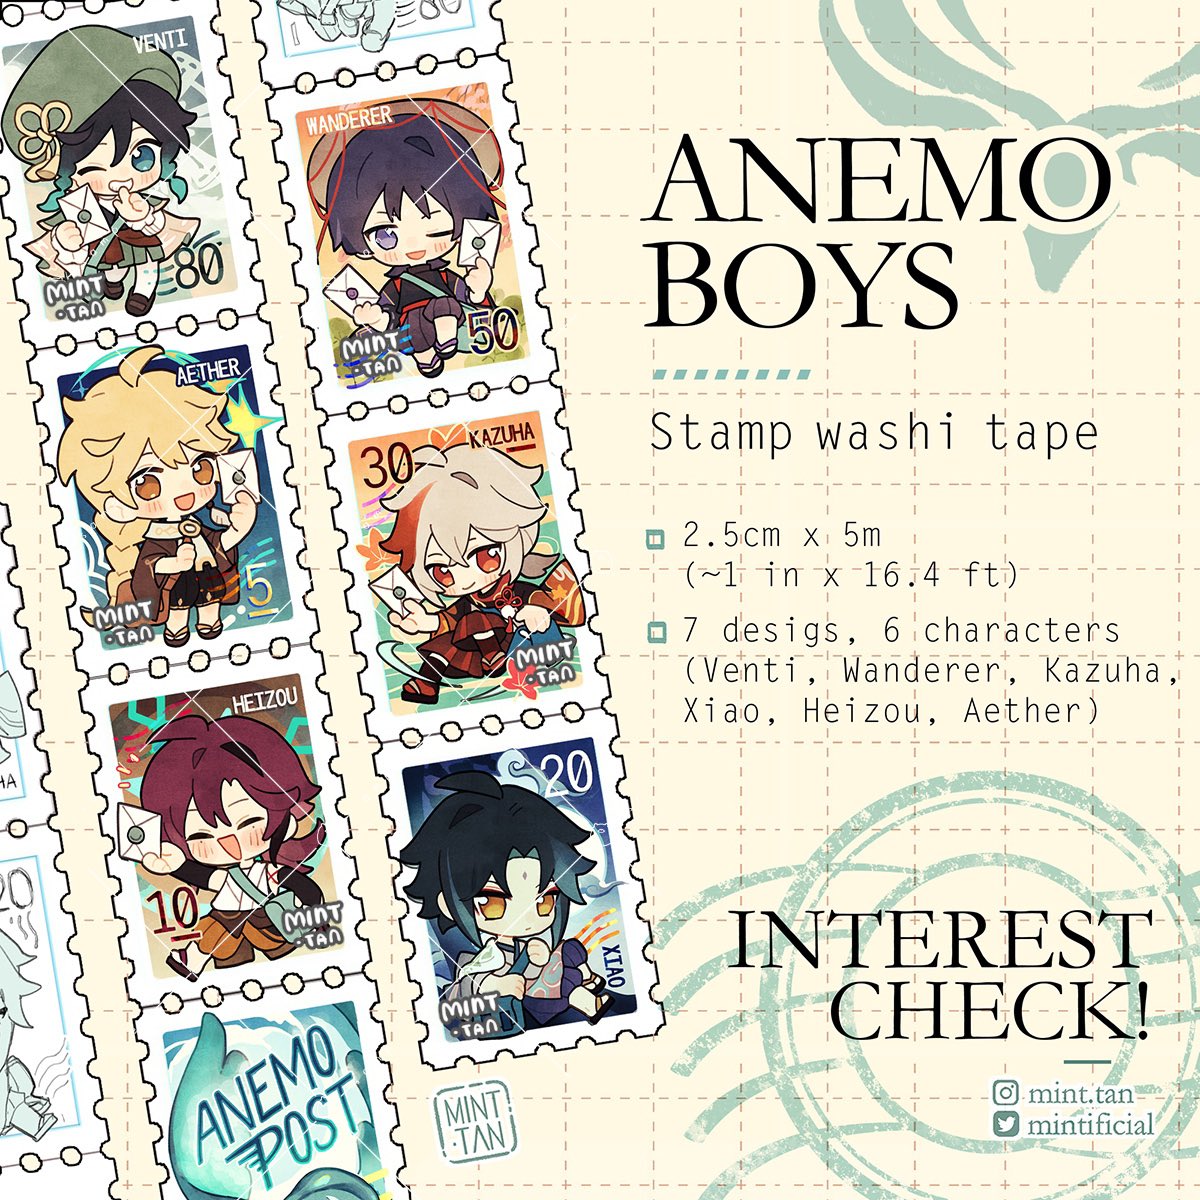 Anemo boys postmen Washi stamp tape - finished preview🌟
Real sample pics in the replies!
-
Hopefully this will be debuting in CF16, Doujima SG, and my online st0re around May~ 
#venti #scaramouche #kazuha #xiao #heizou #aether https://t.co/rK5T1AOWtg 